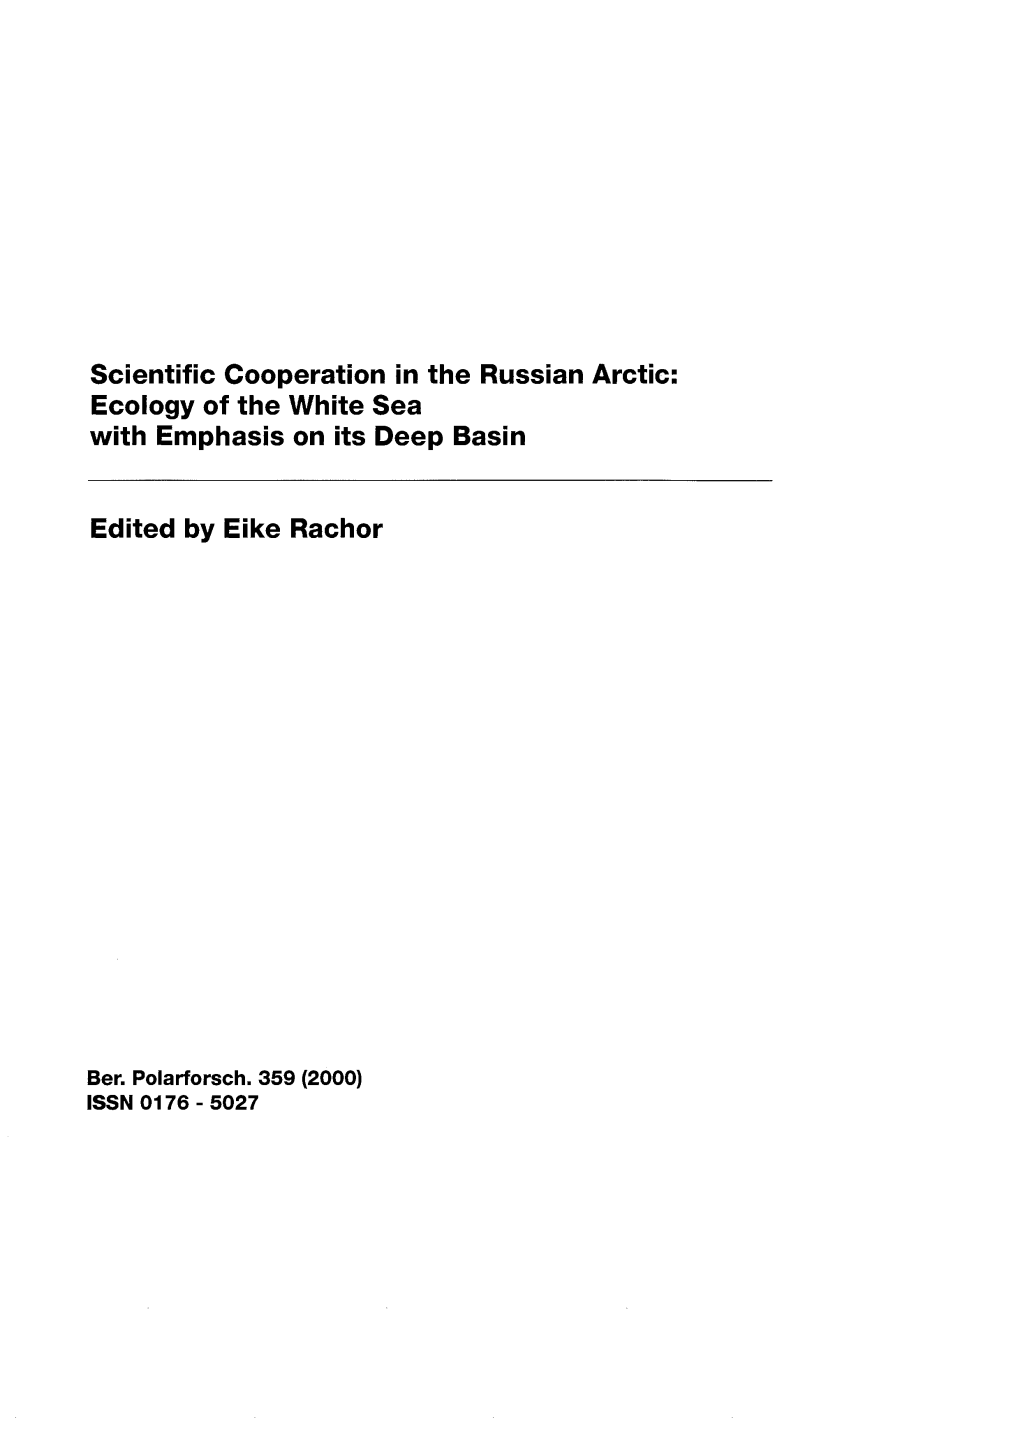 Ecology of the White Sea with Emphasis on Its Deep Basin Edited